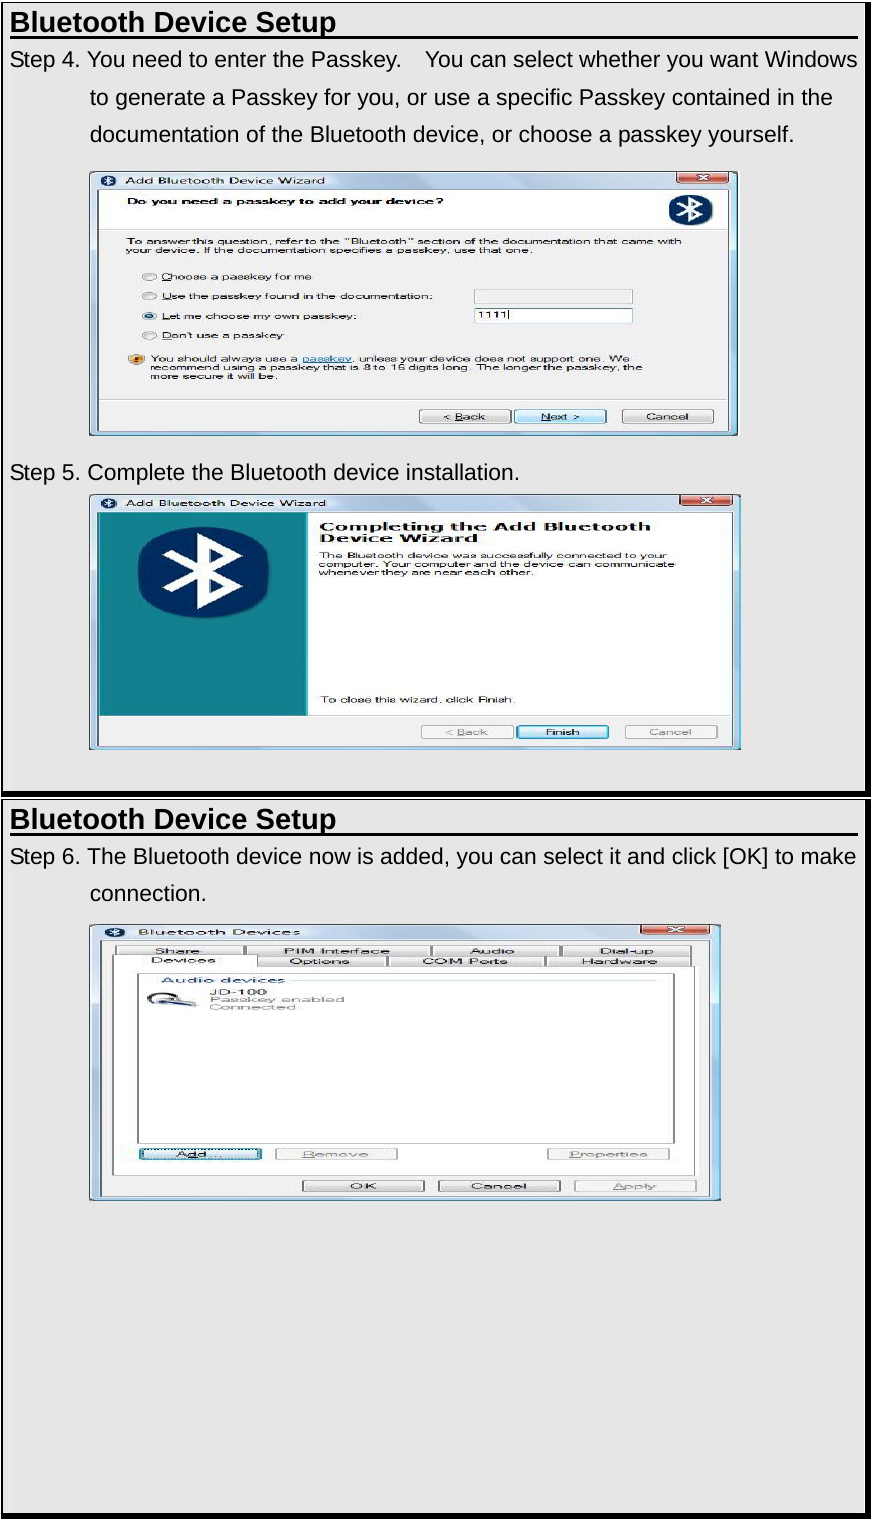 Bluetooth Device Setup                                     Step 4. You need to enter the Passkey.   You can select whether you want Windows to generate a Passkey for you, or use a specific Passkey contained in the documentation of the Bluetooth device, or choose a passkey yourself.          Step 5. Complete the Bluetooth device installation.           Bluetooth Device Setup                                     Step 6. The Bluetooth device now is added, you can select it and click [OK] to make connection.                